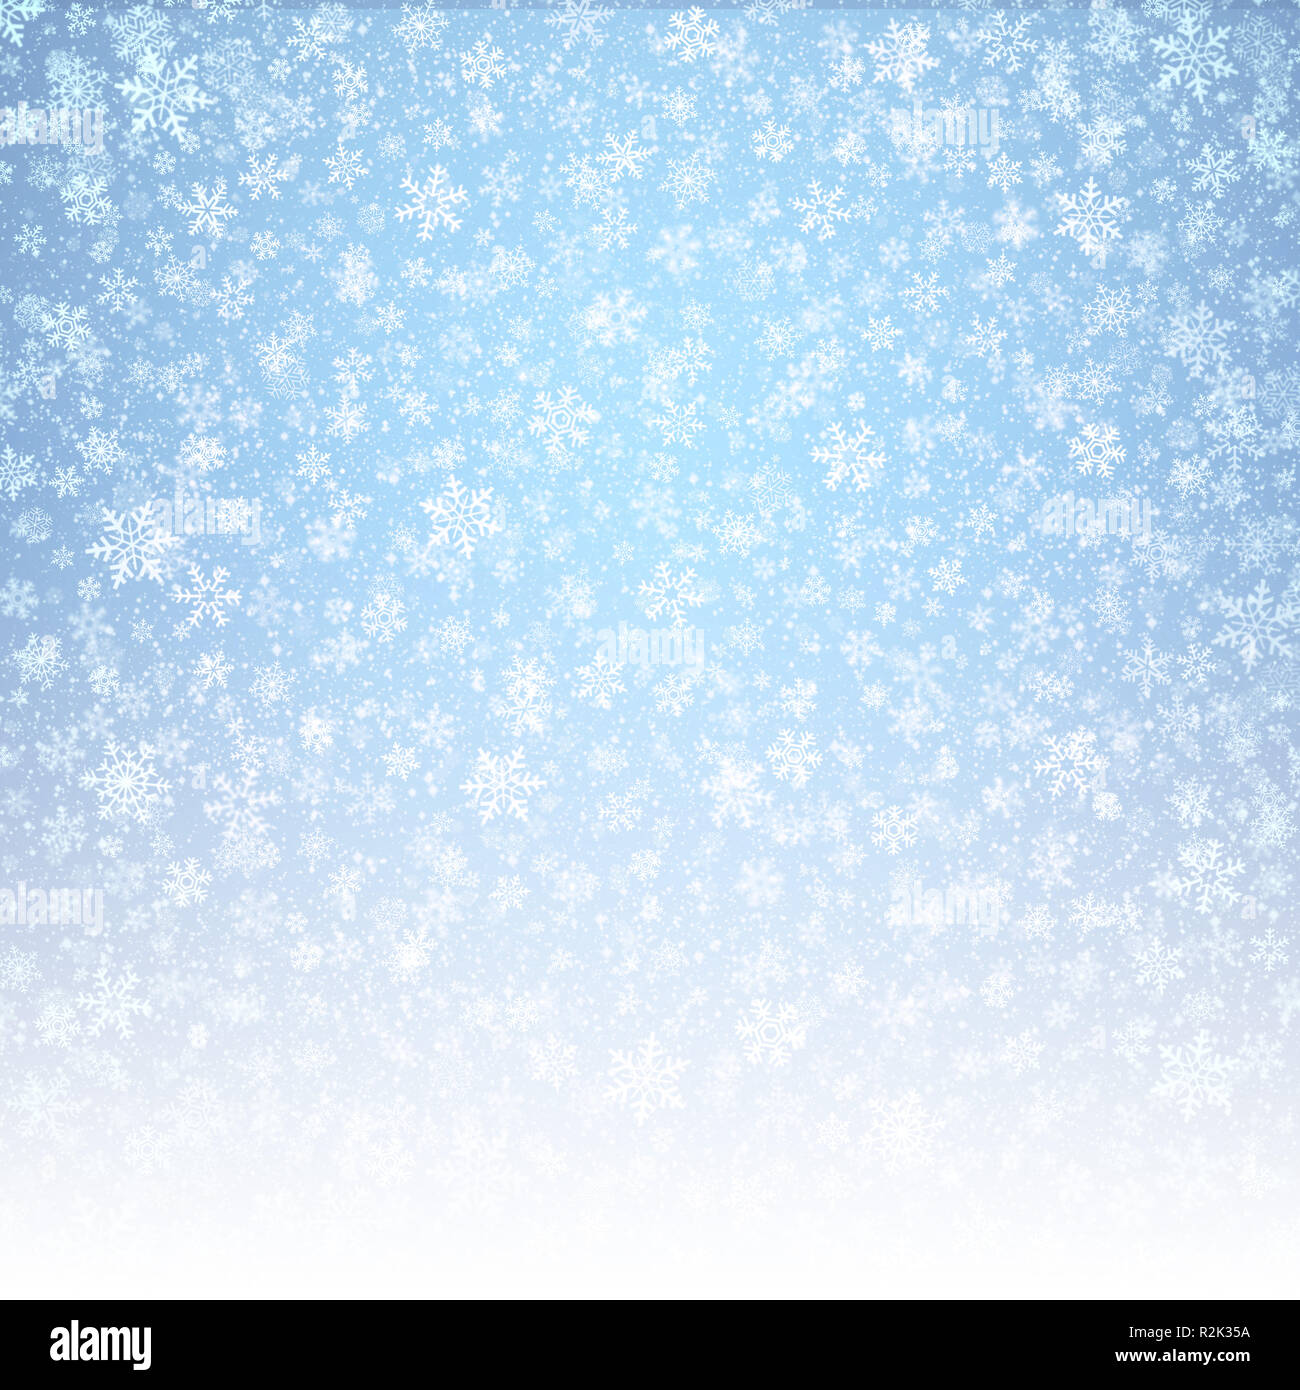 White snowflakes shapes and falling snow on an icy blue background. Winter seasonal material. Stock Photo